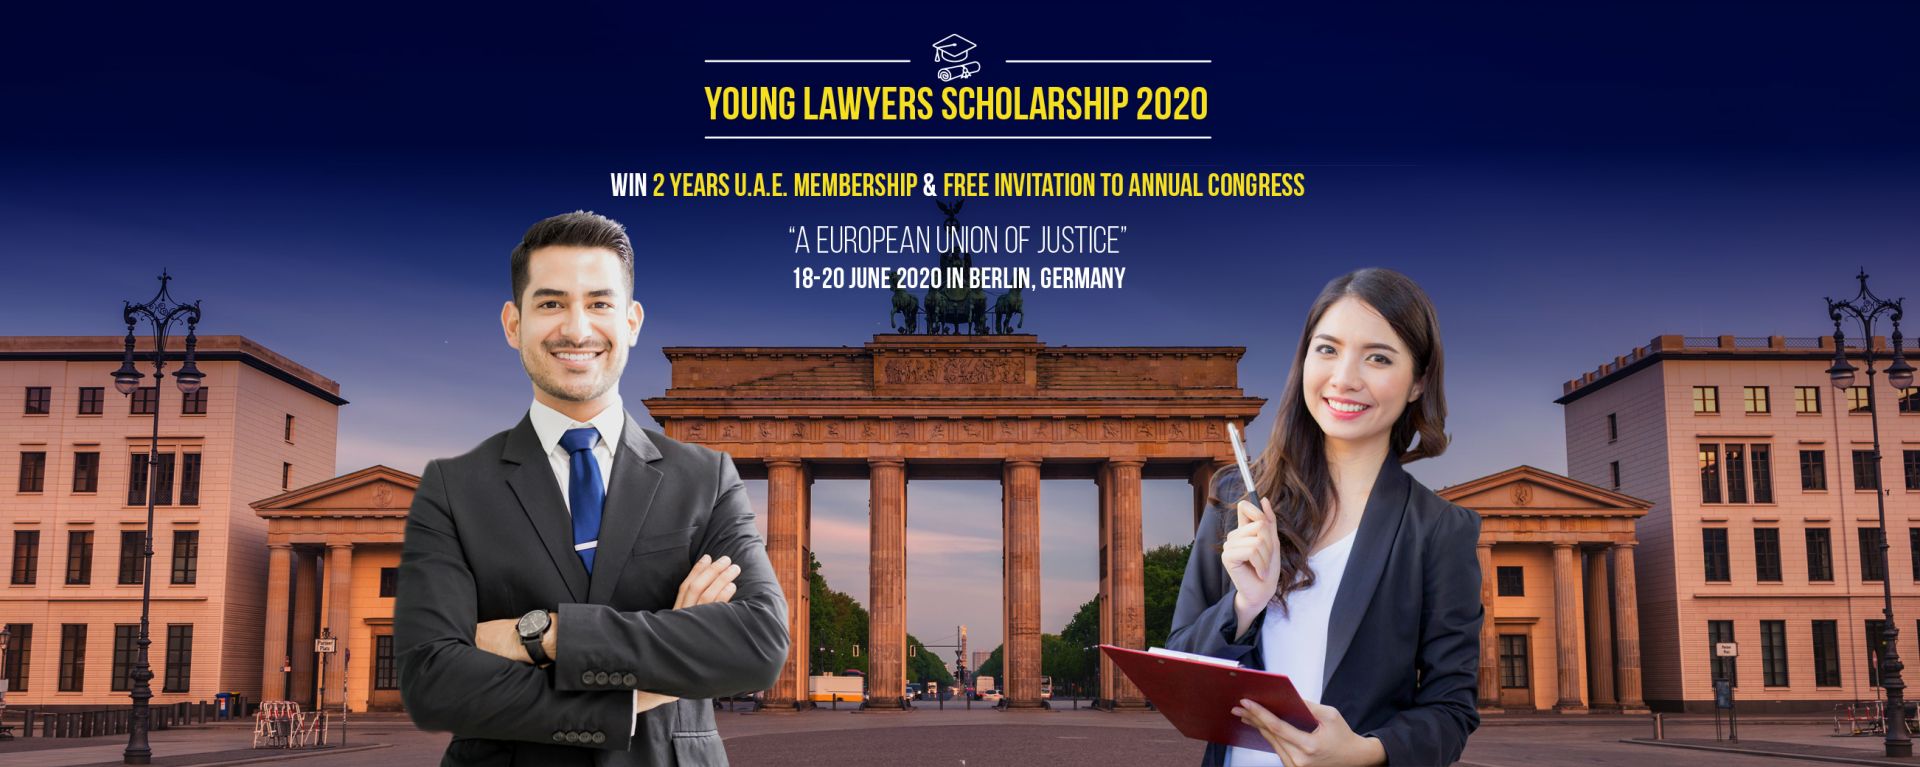 U.A.E. Scholarship for Young Lawyers 2020